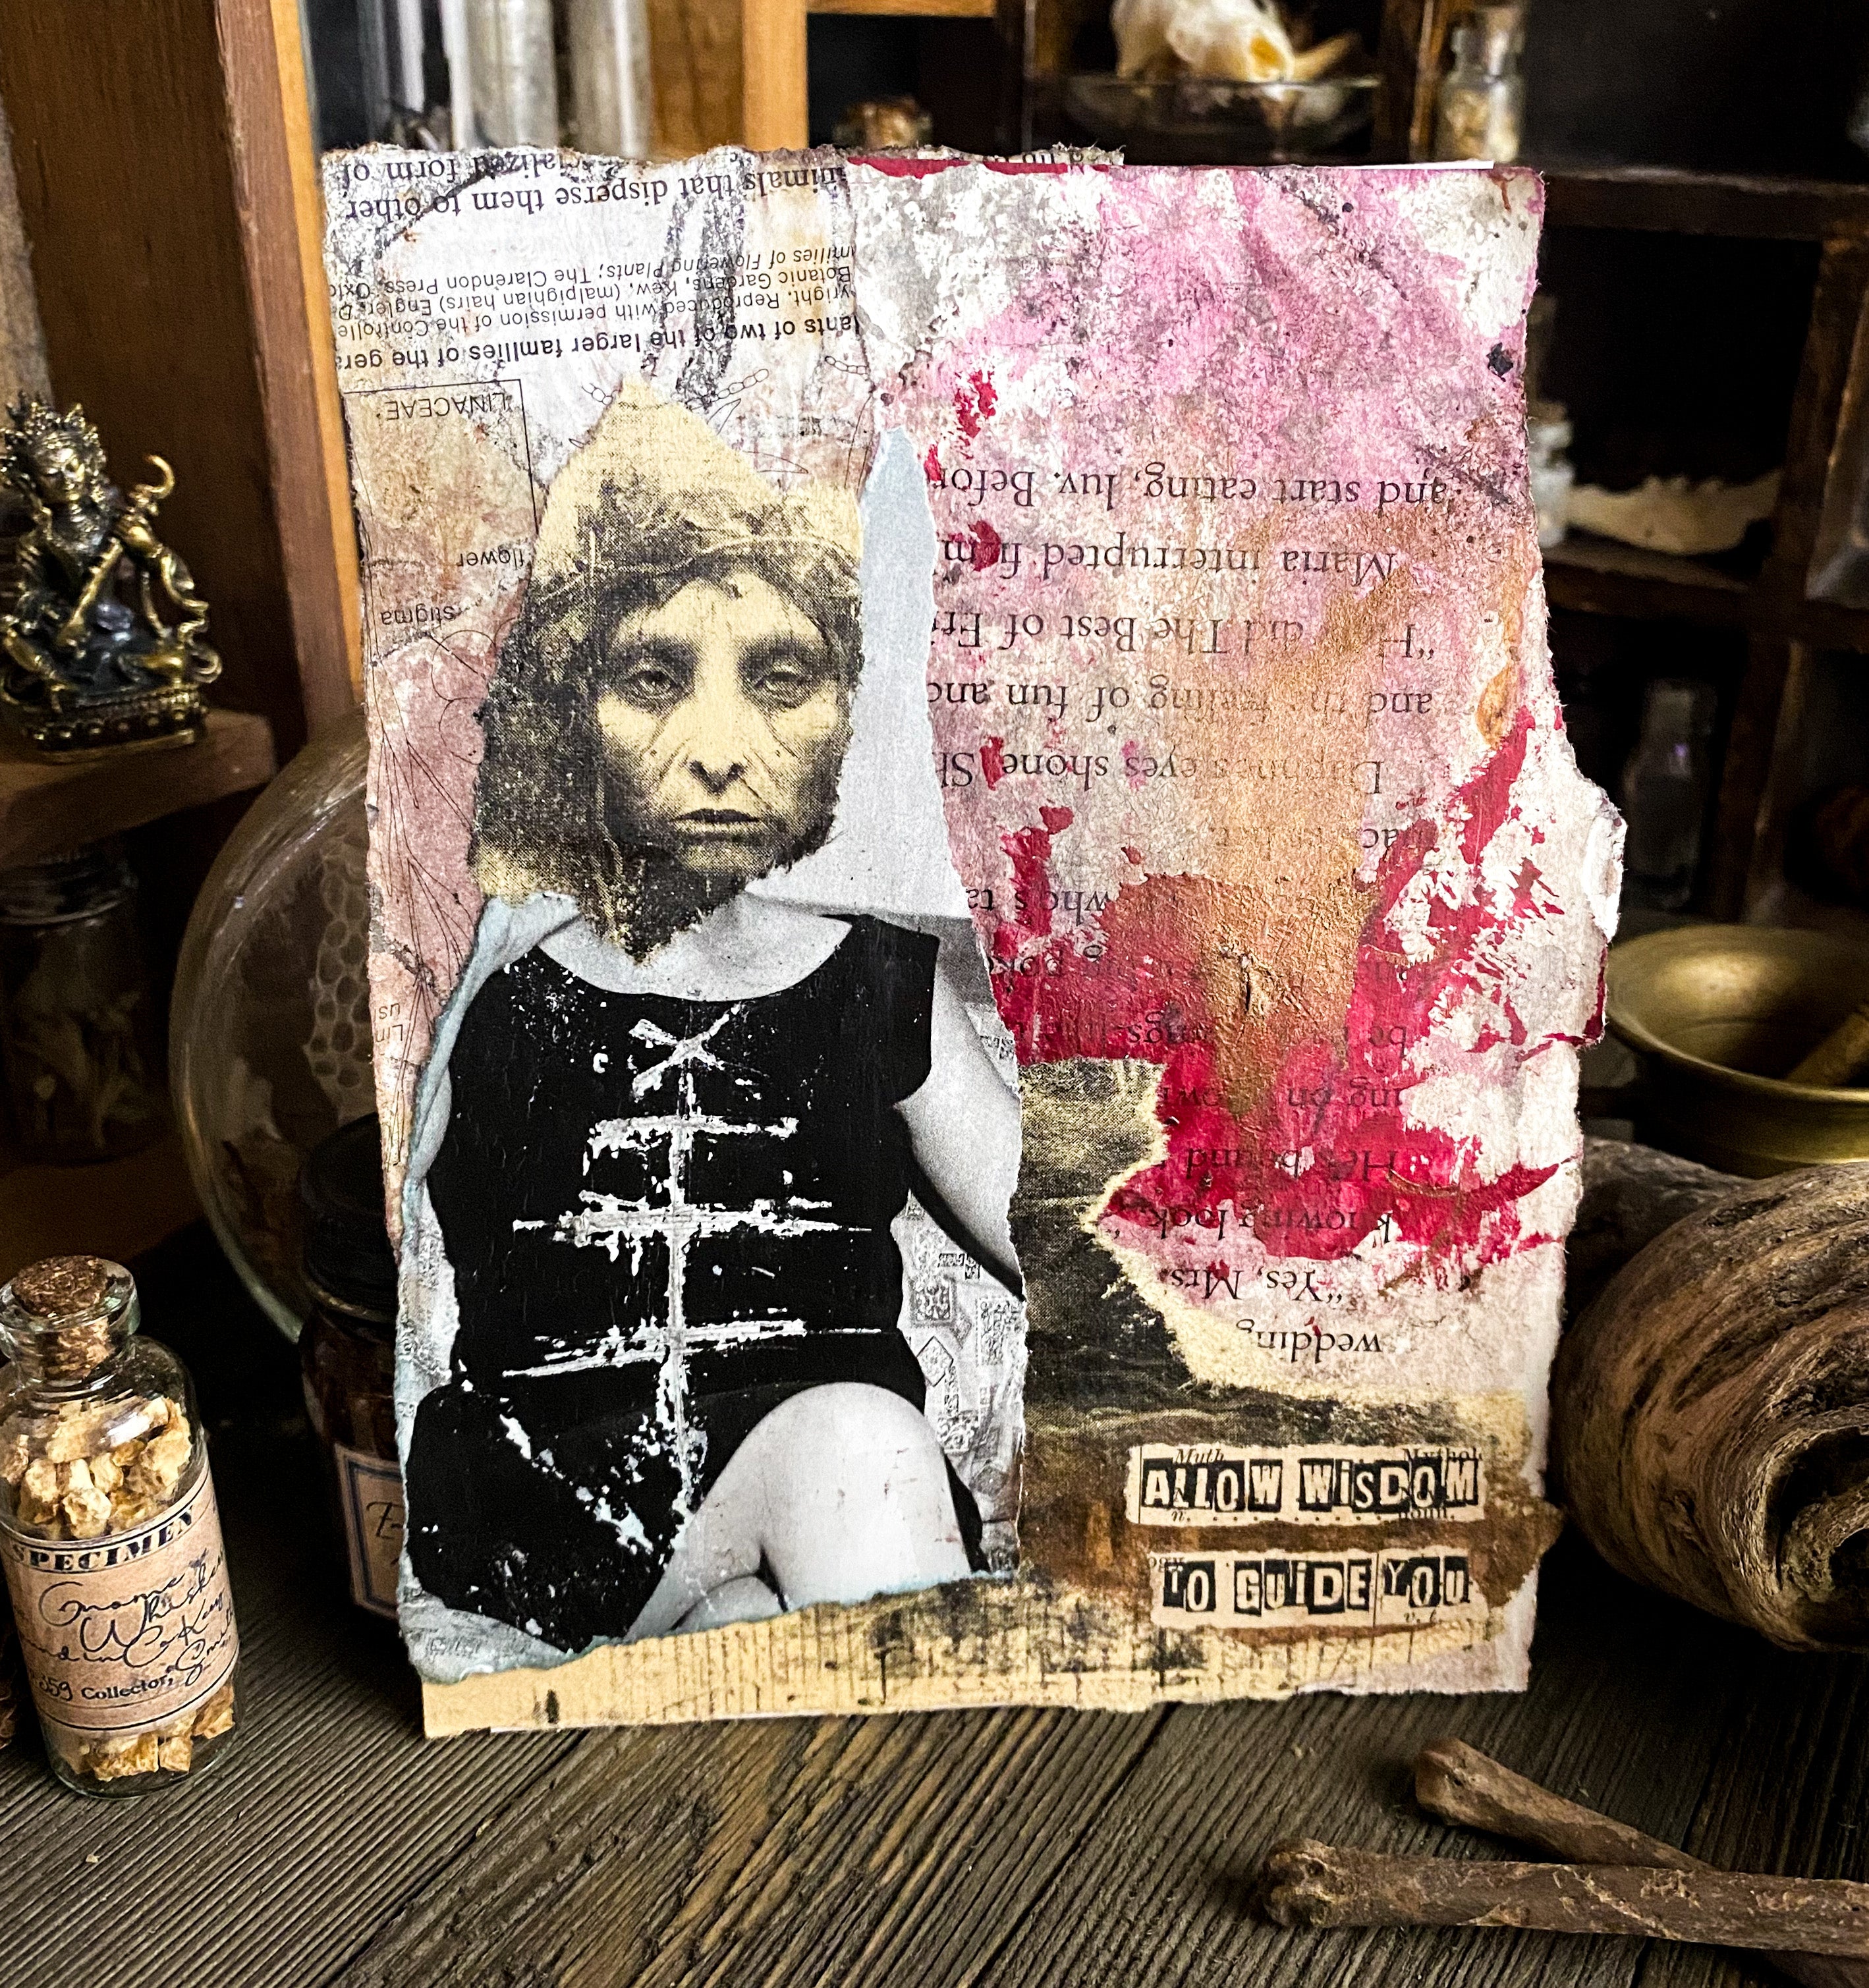 Allow Wisdom to Guide You - Original Mixed Media Collage